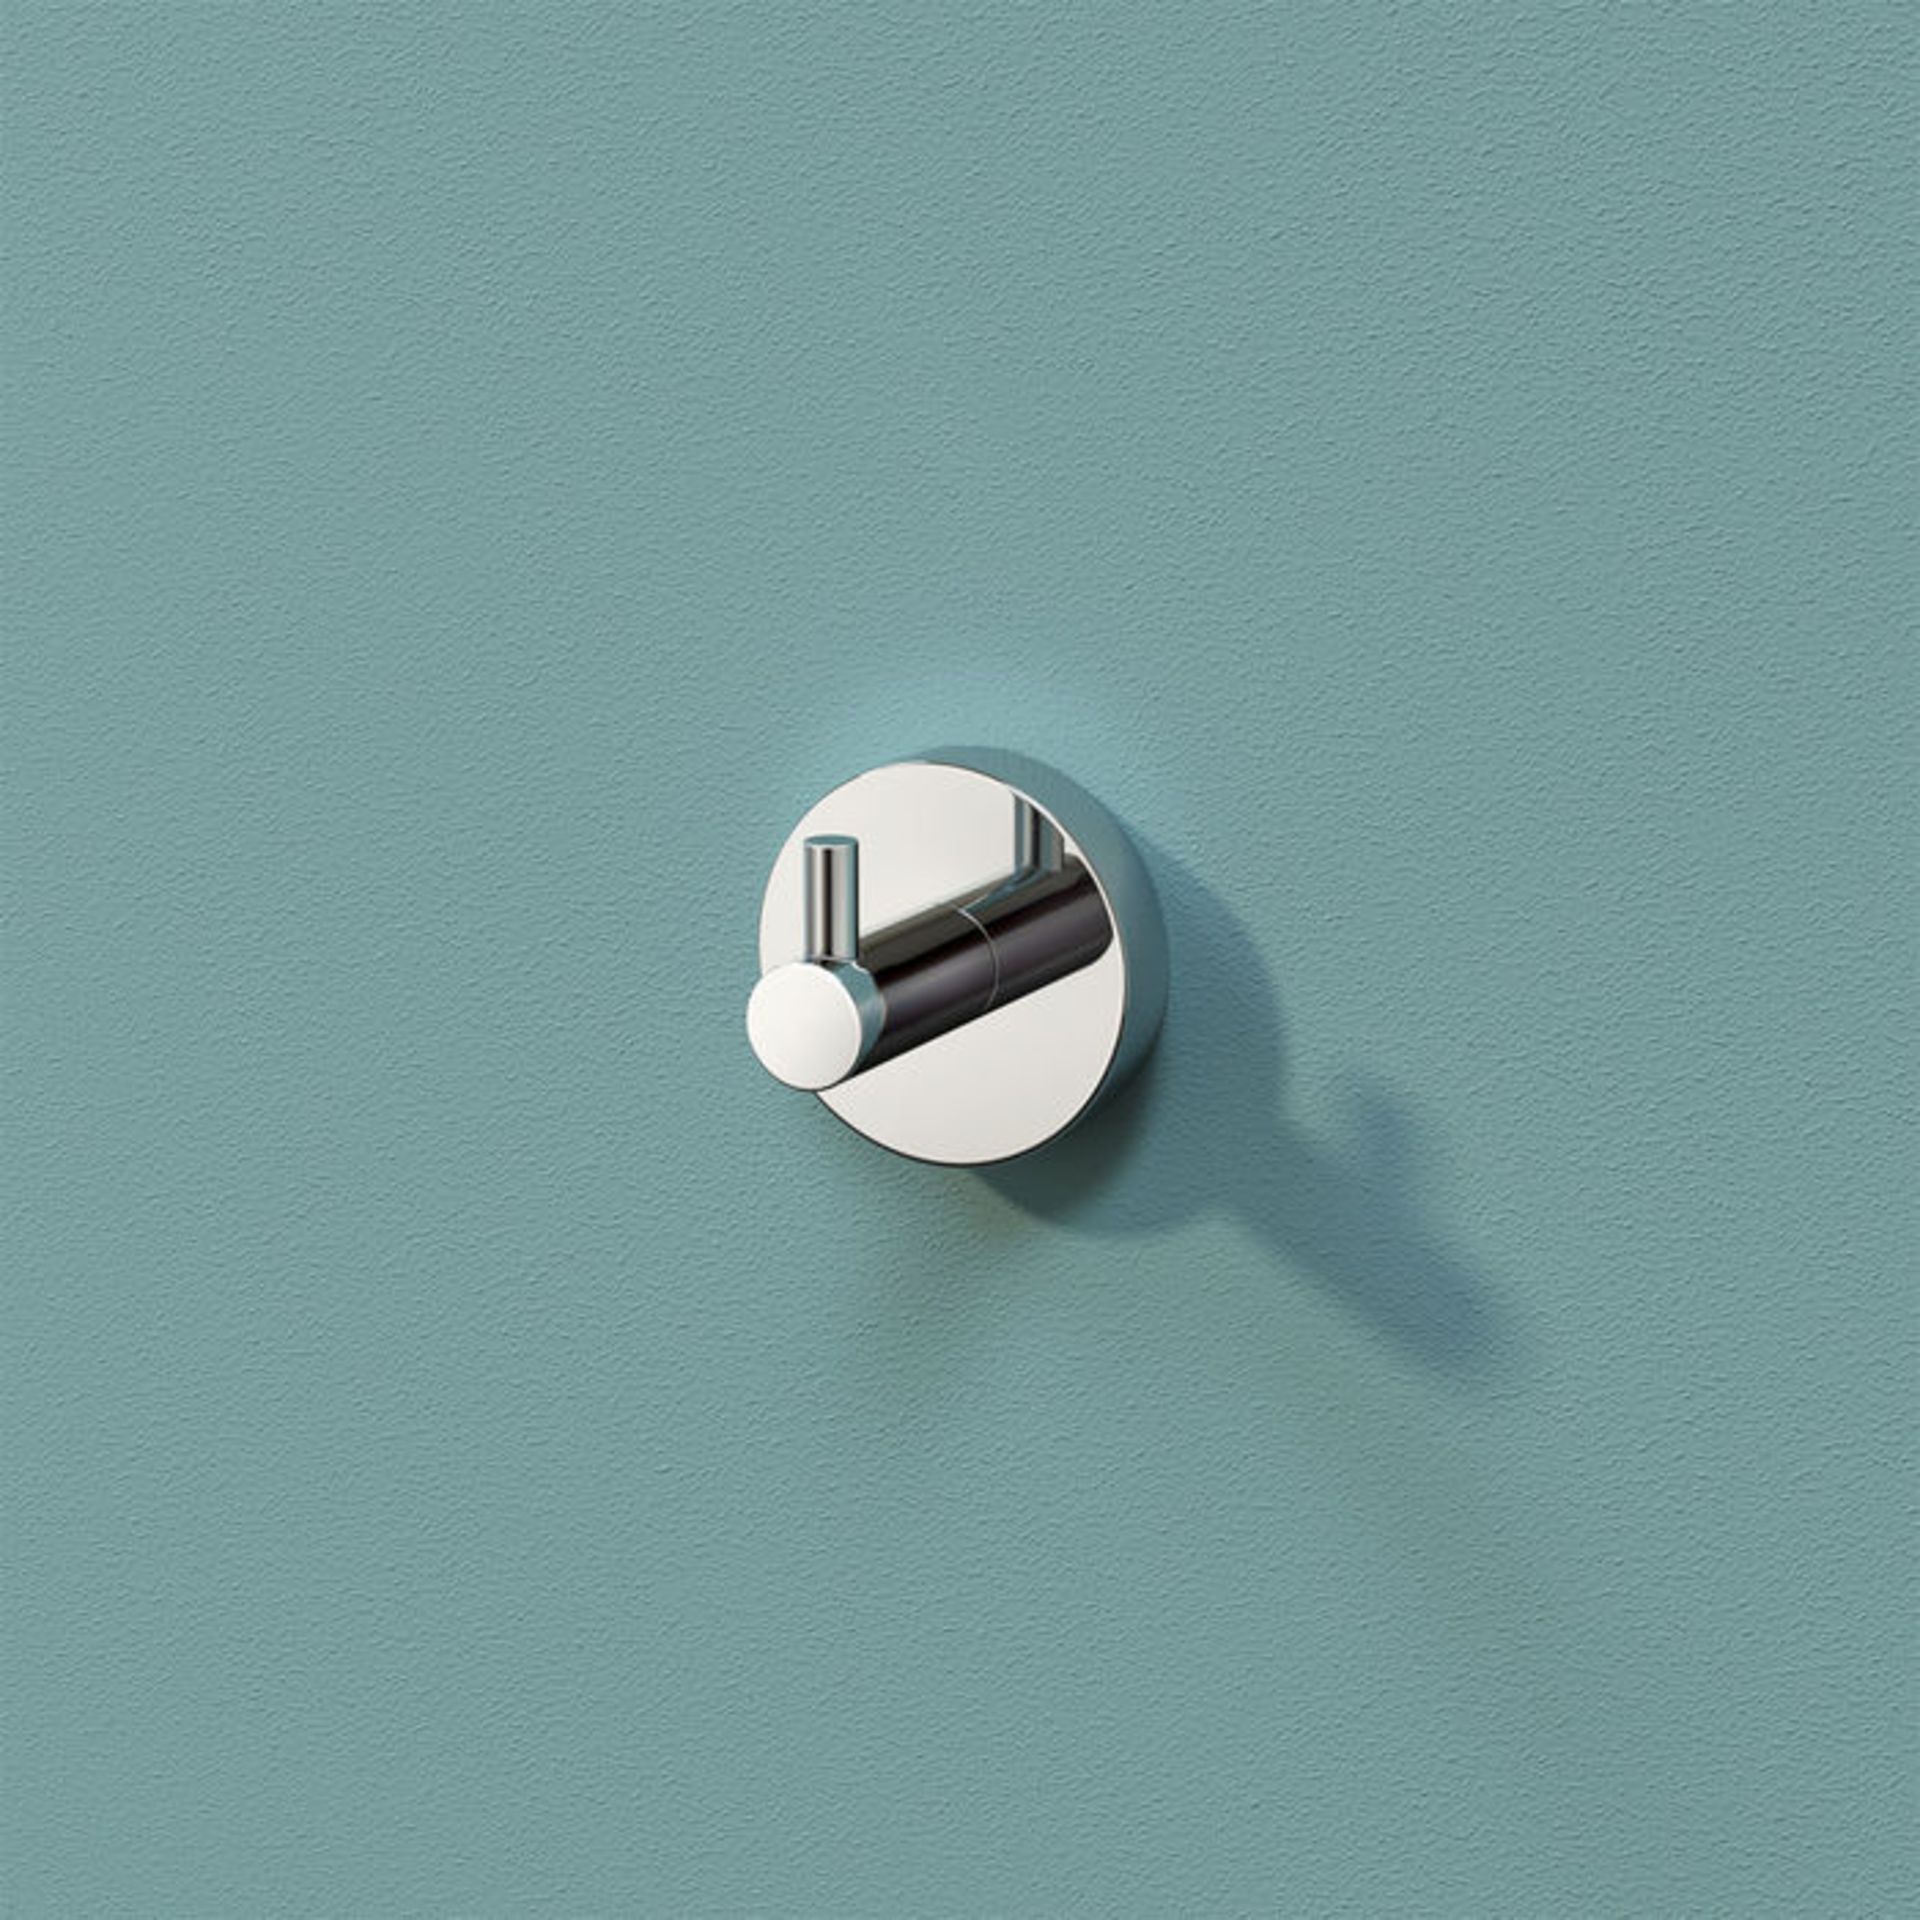 (D1003) Finsbury Robe Hook. Finishes your bathroom with a little extra functionality and style... - Image 3 of 3